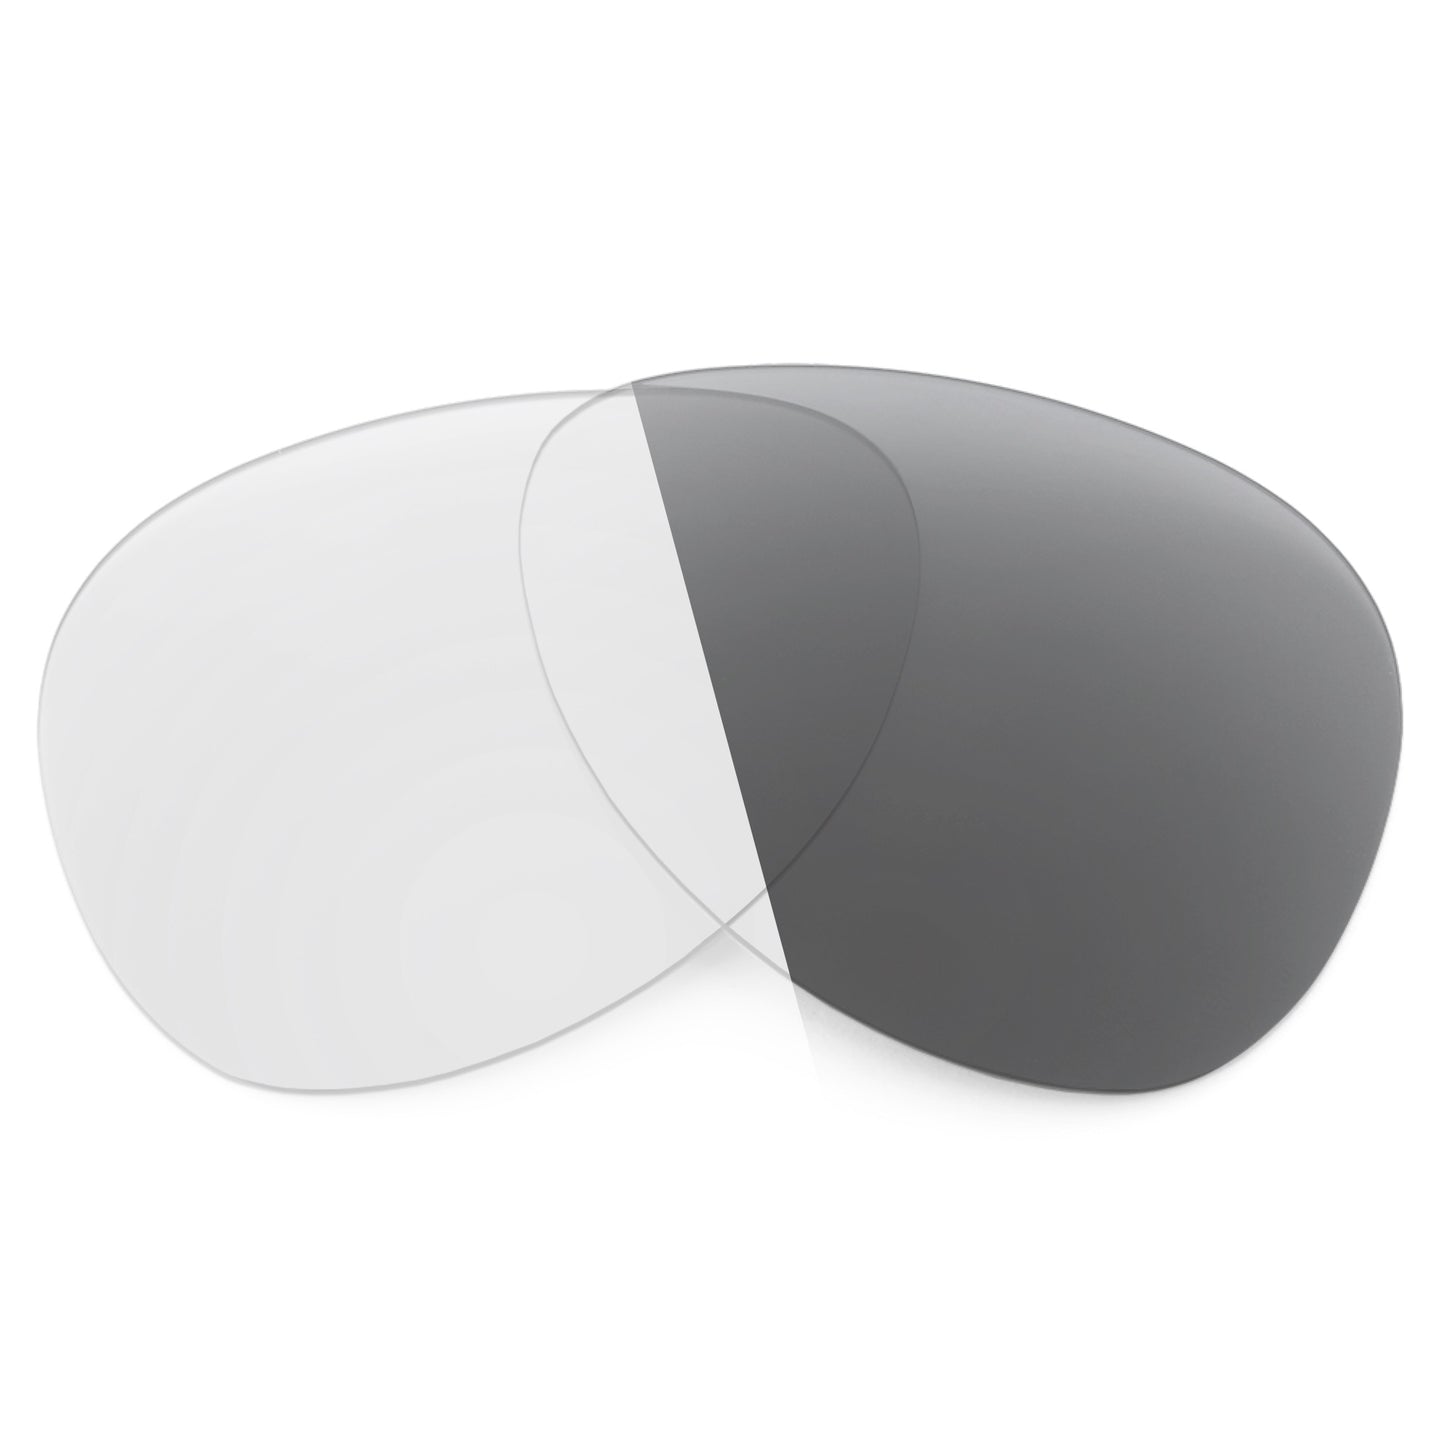 Revant replacement lenses for Ray-Ban New Aviator RB3625 55mm Non-Polarized Adapt Gray Photochromic